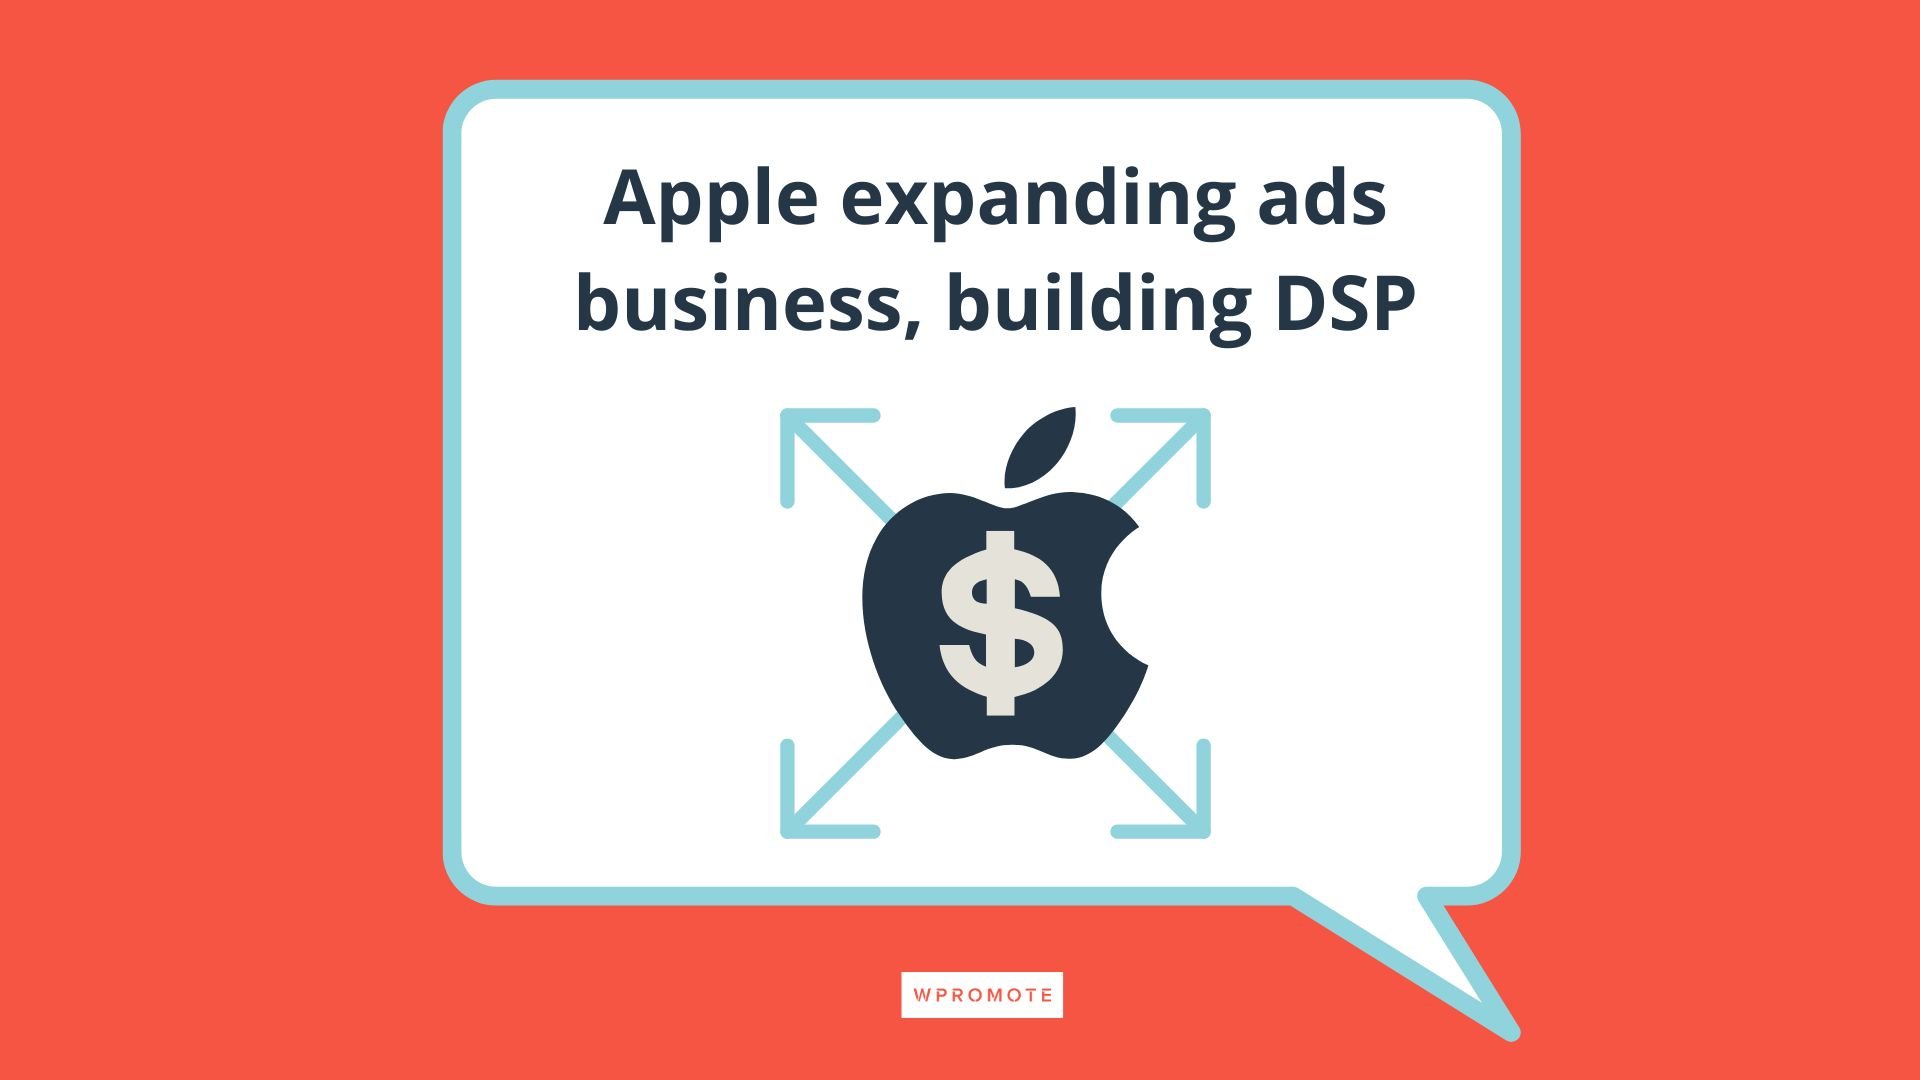 Apple expanding ads business, building DSP